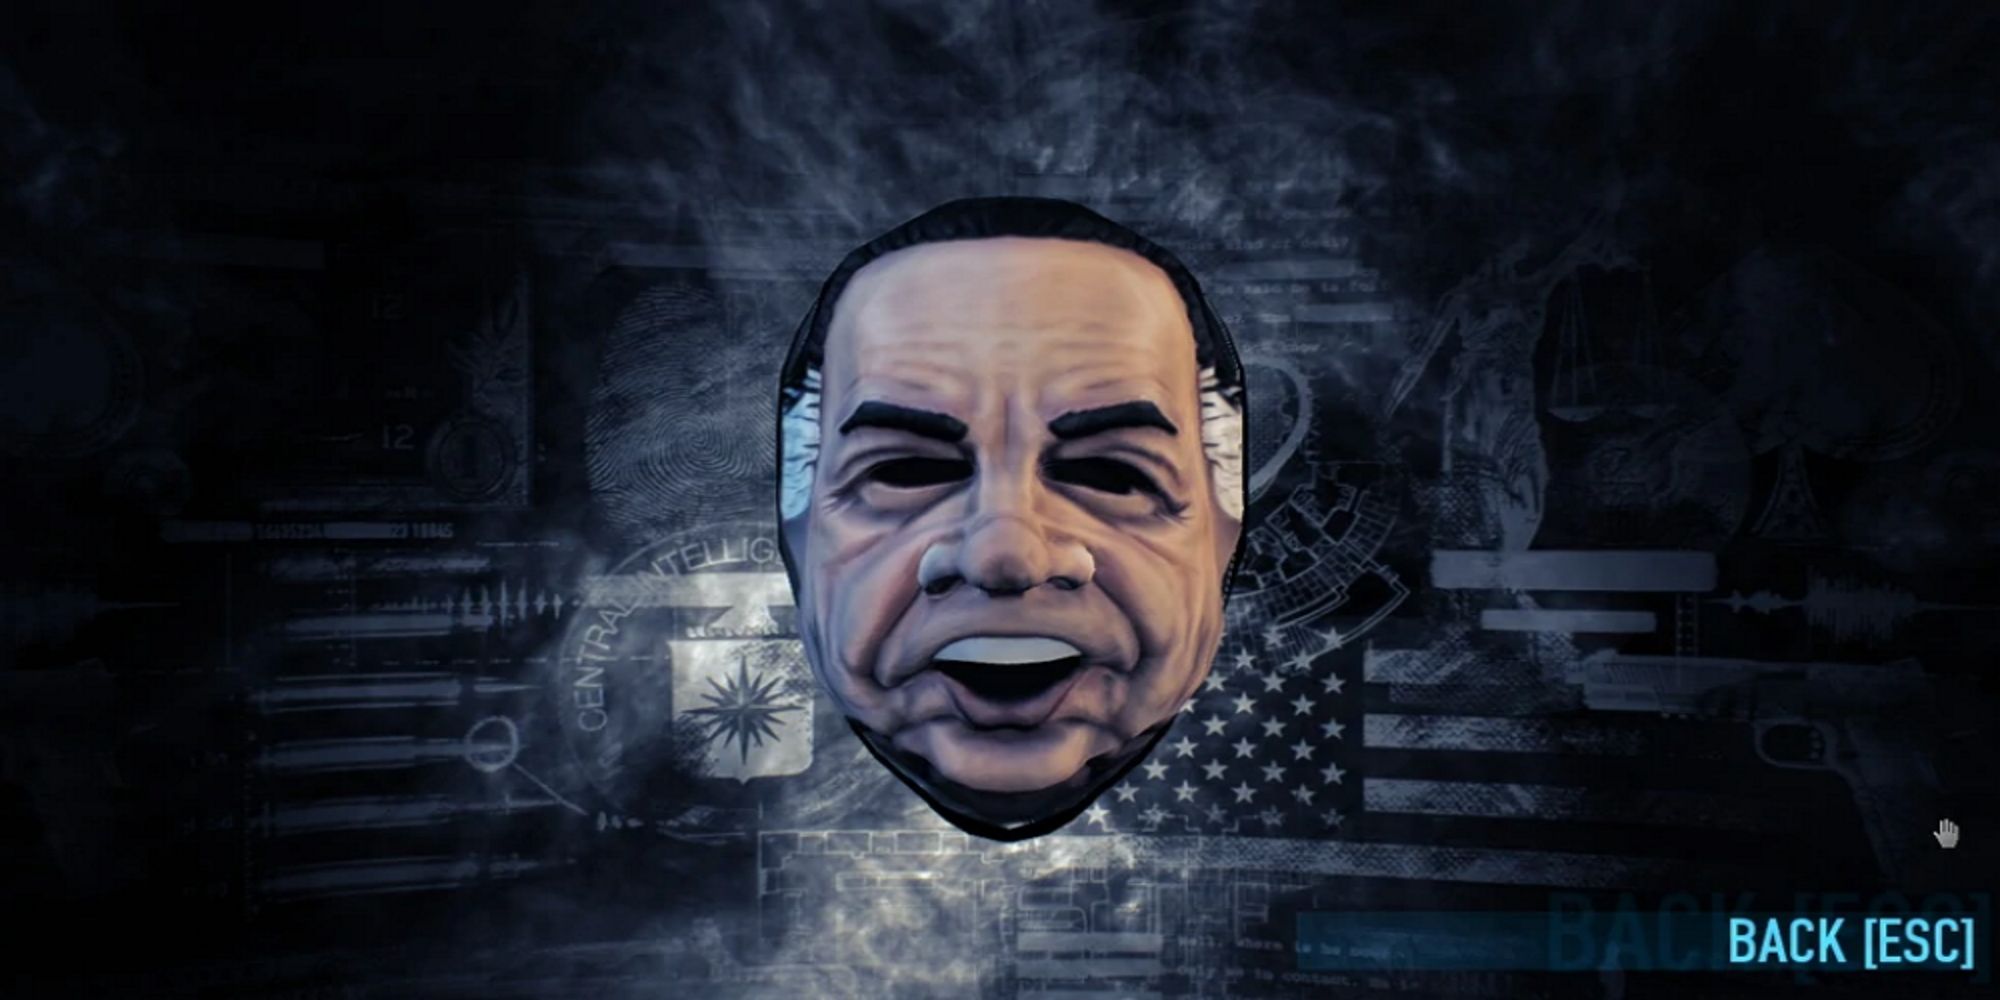 The 37th mask from PAYDAY 2